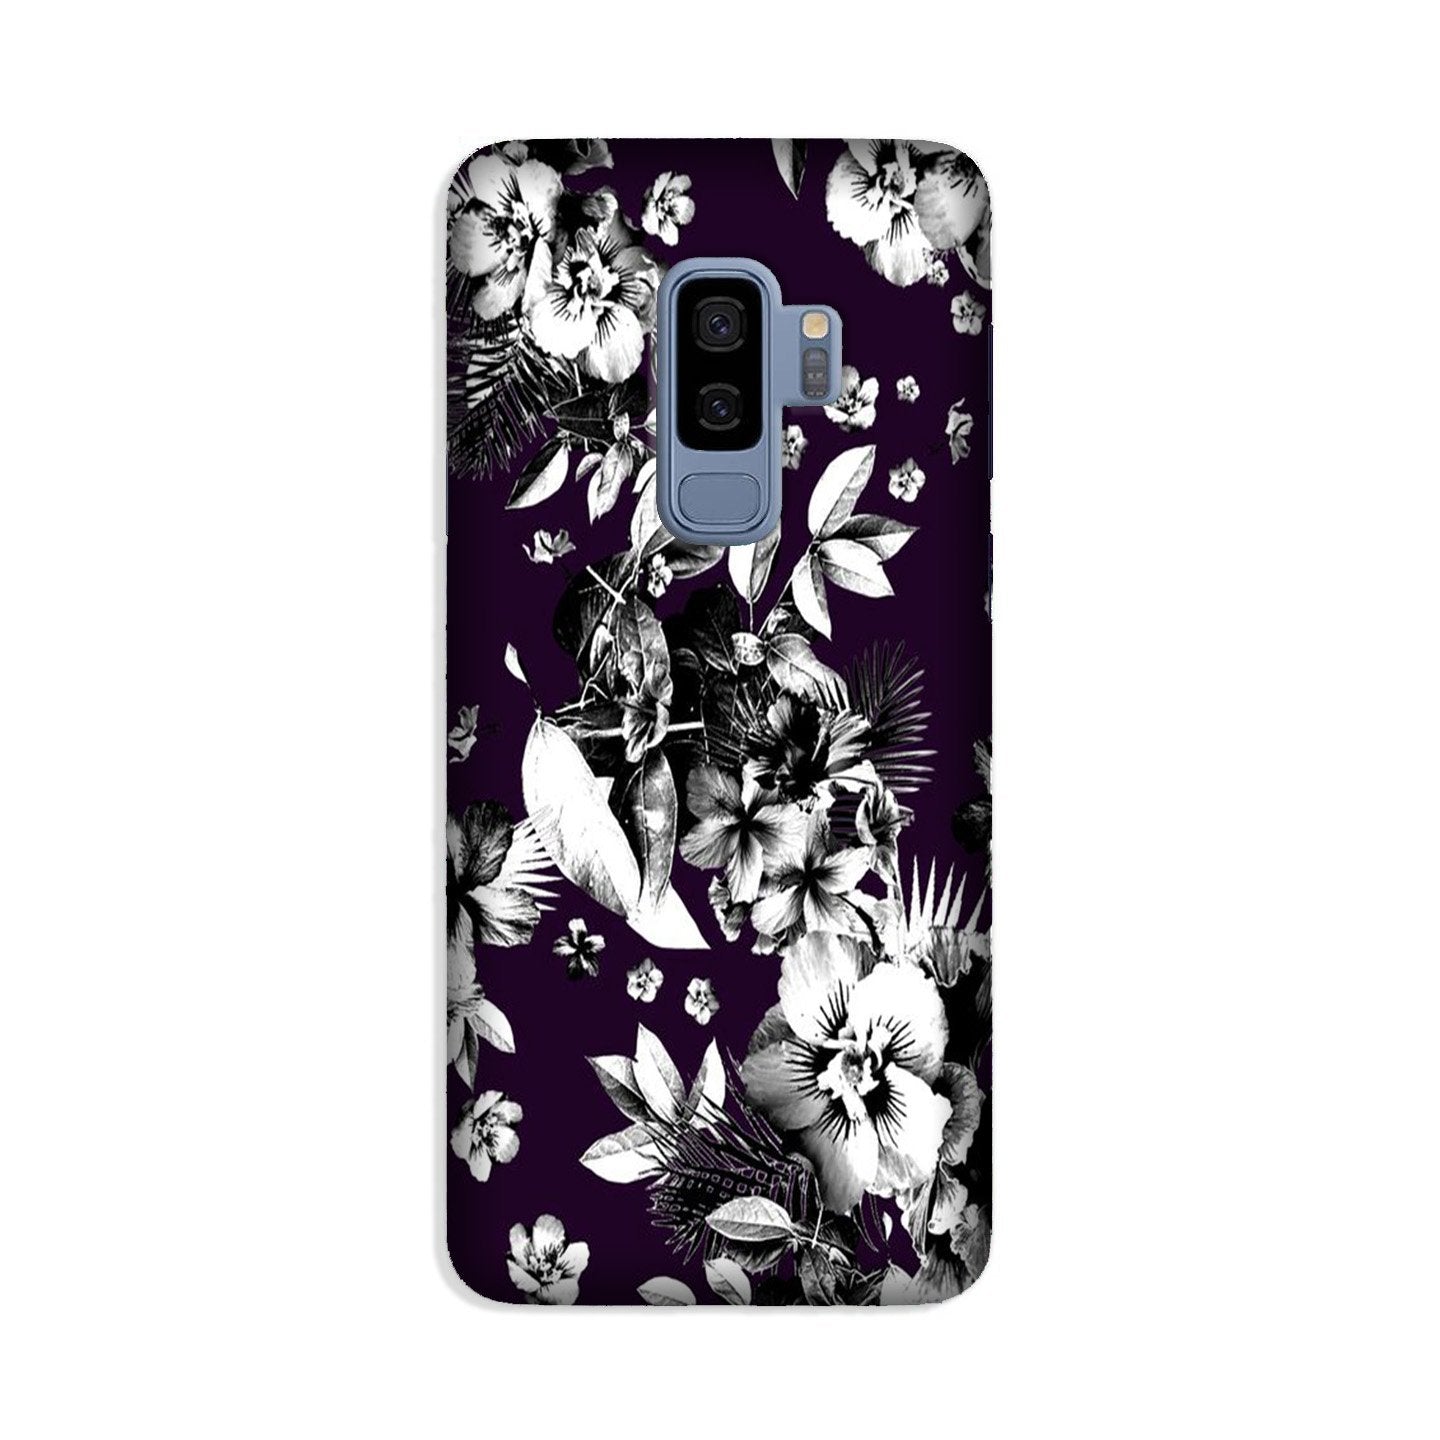 white flowers Case for Galaxy S9 Plus